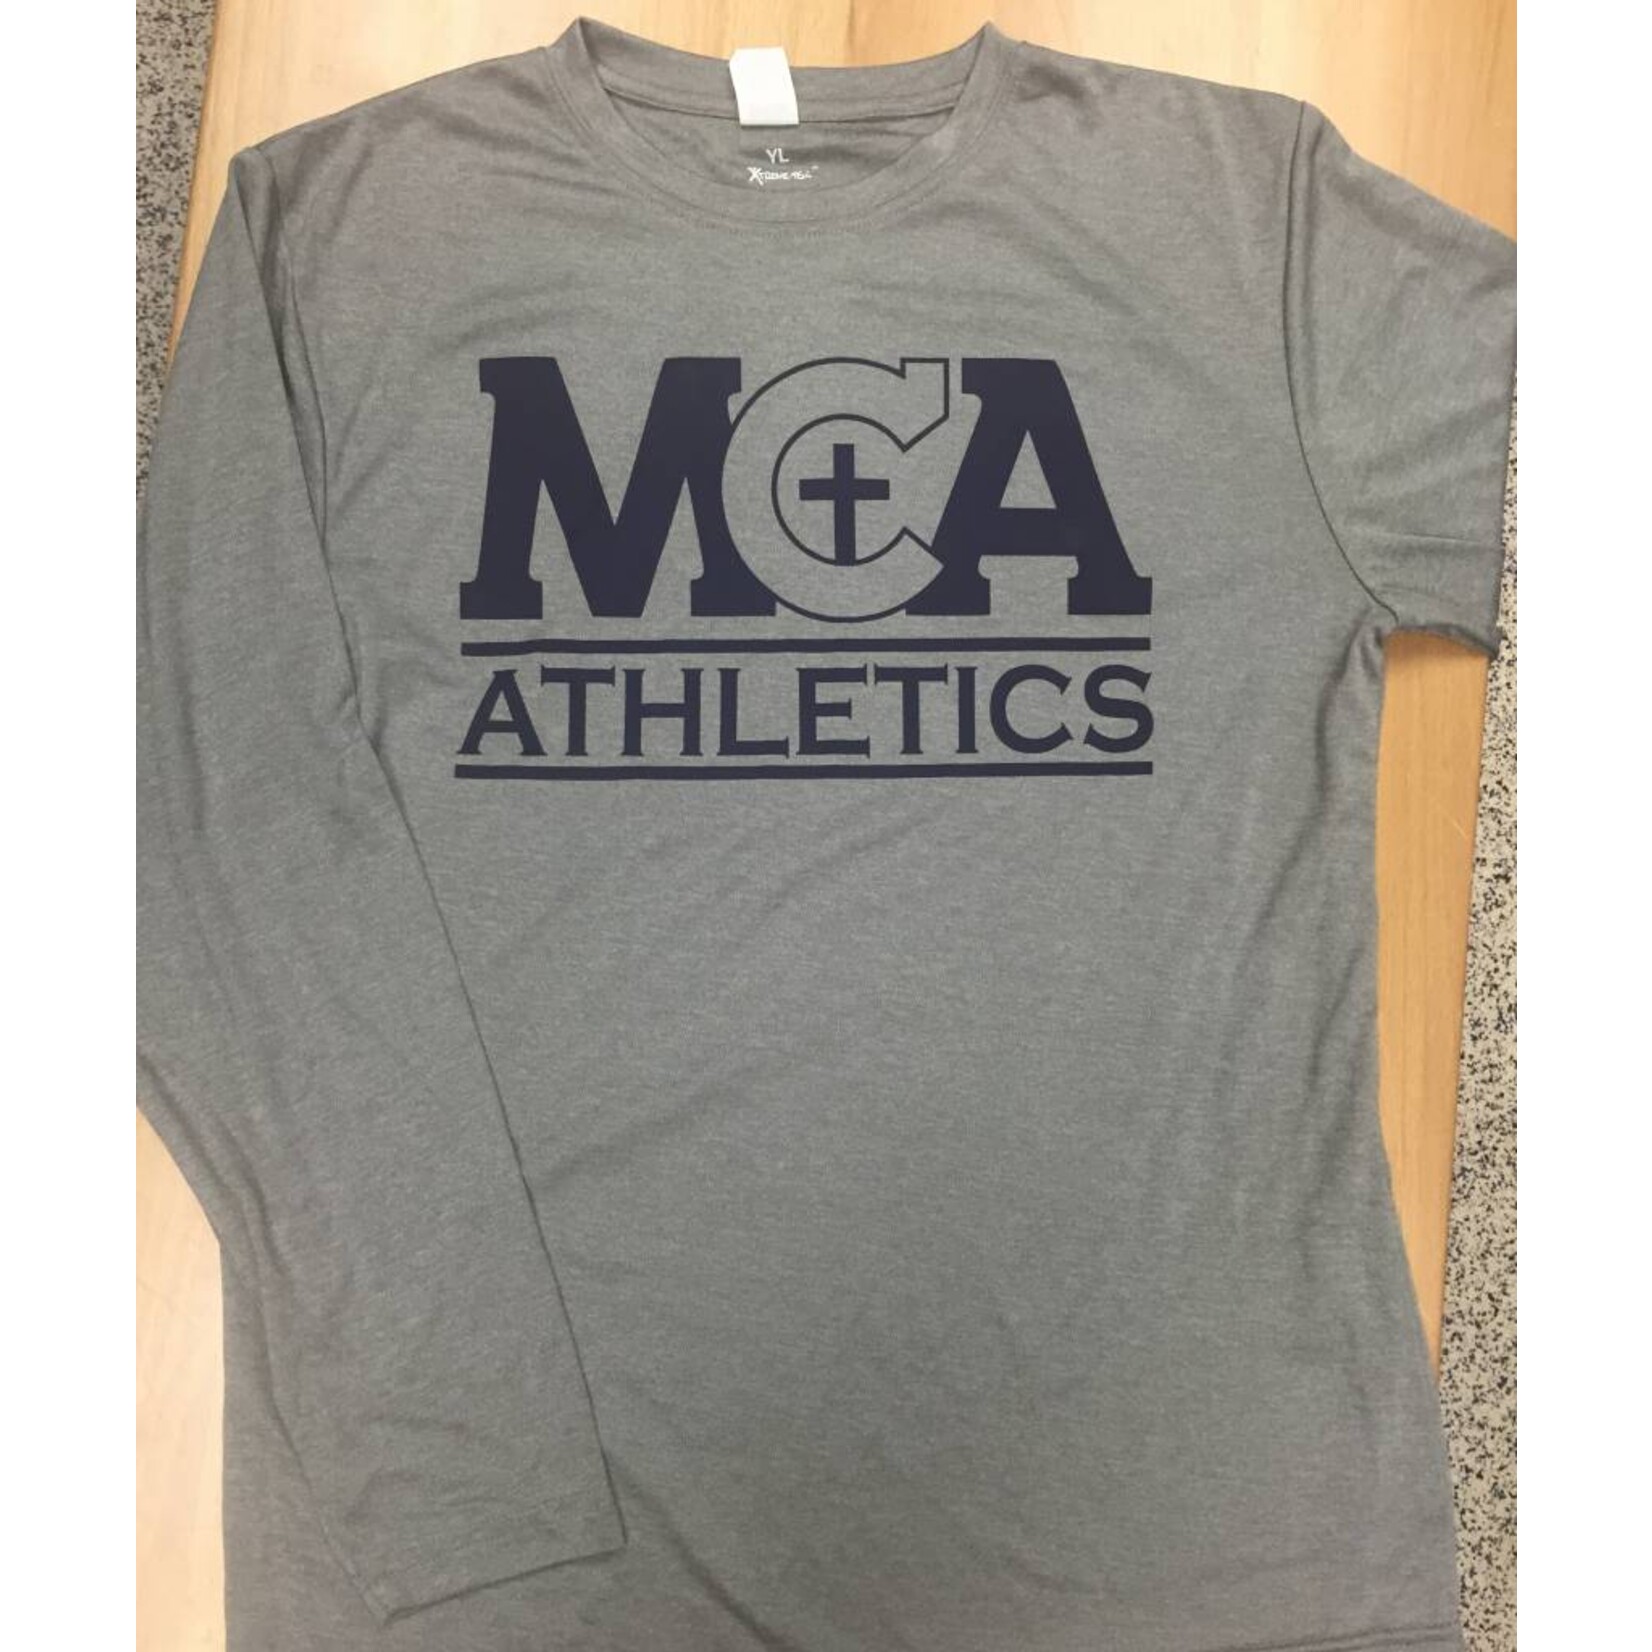 BAW Athletic MS Only-L/S Dri-fit Gray